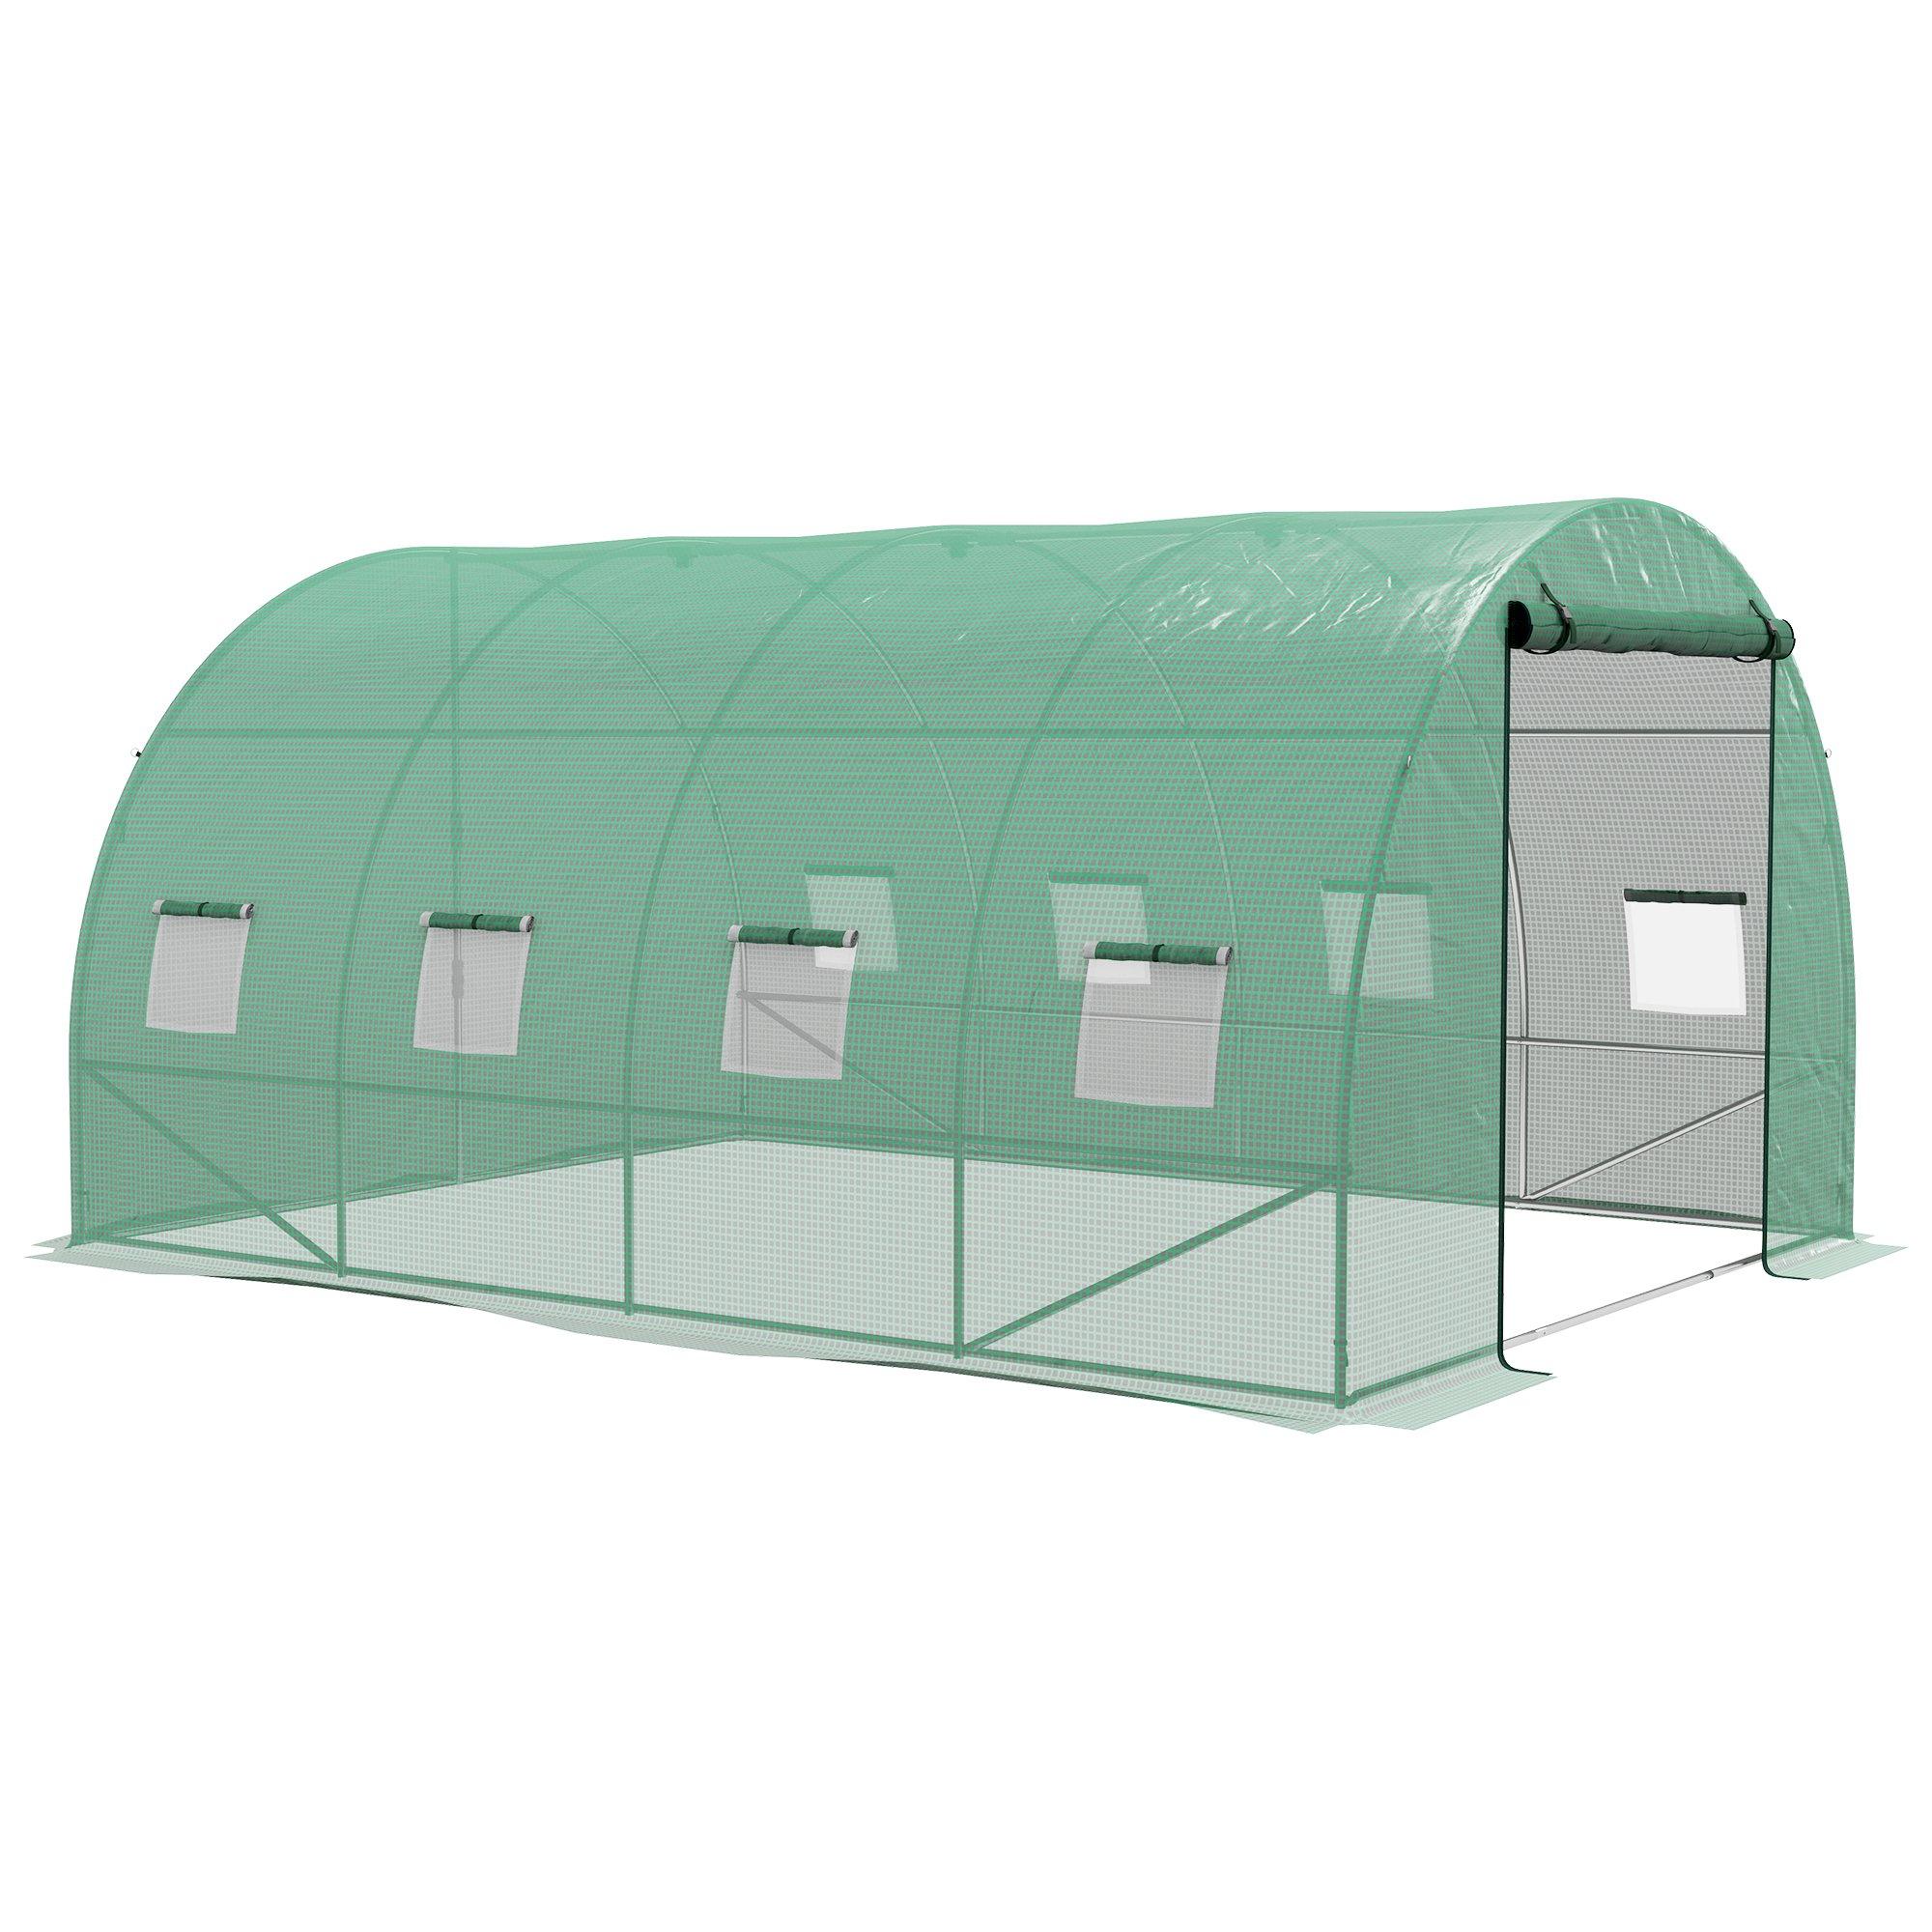 4 x 3(m) Polytunnel Greenhouse with Sprinkler System, Green House for Garden